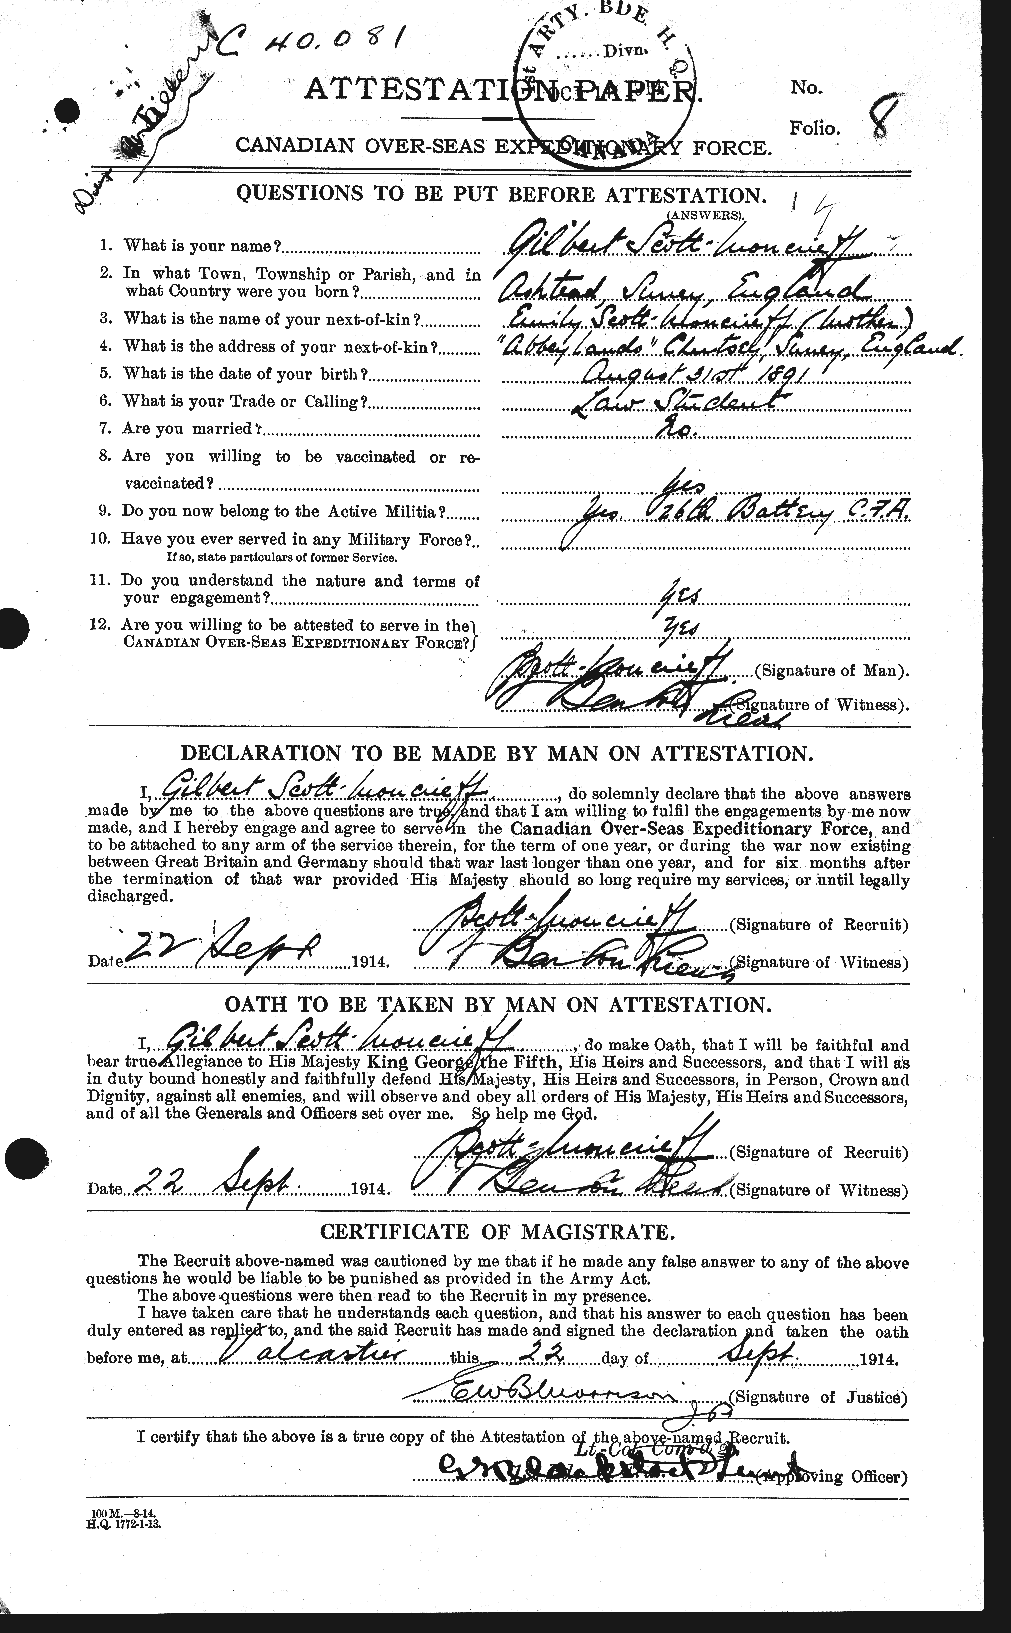 Personnel Records of the First World War - CEF 087242a